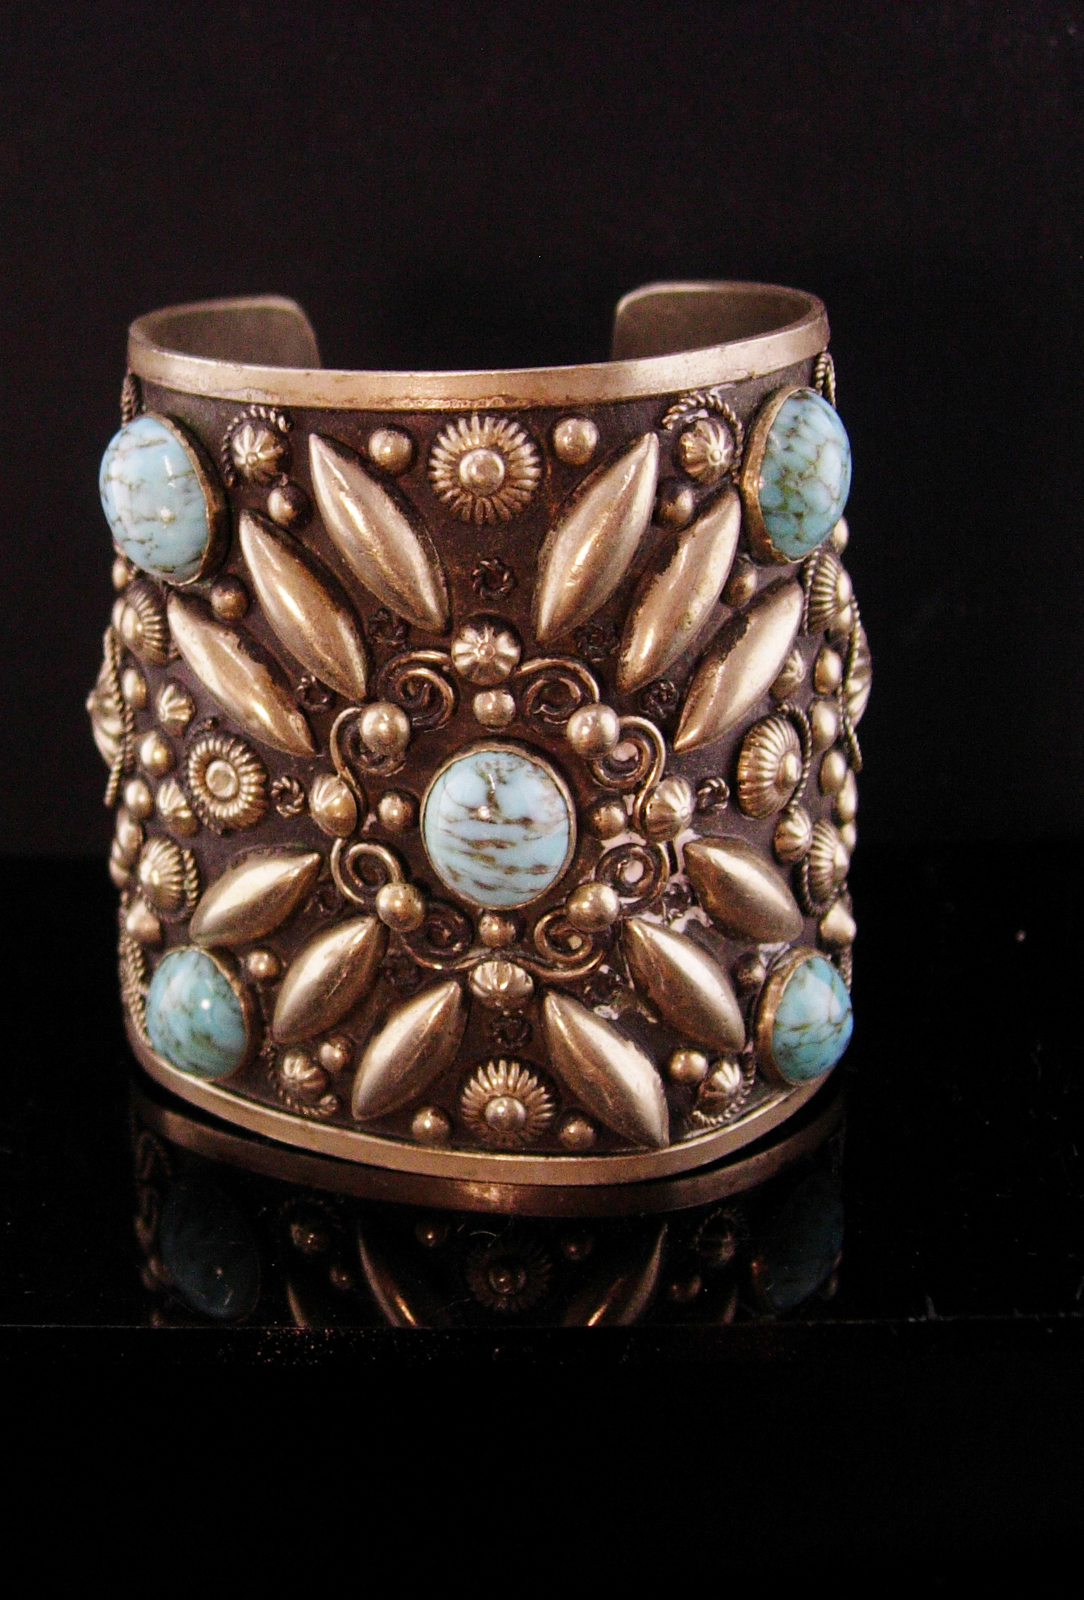 Primary image for Antique Gypsy Turquoise etruscan bracelet bangle cuff - Vintage Turquoise cabs g